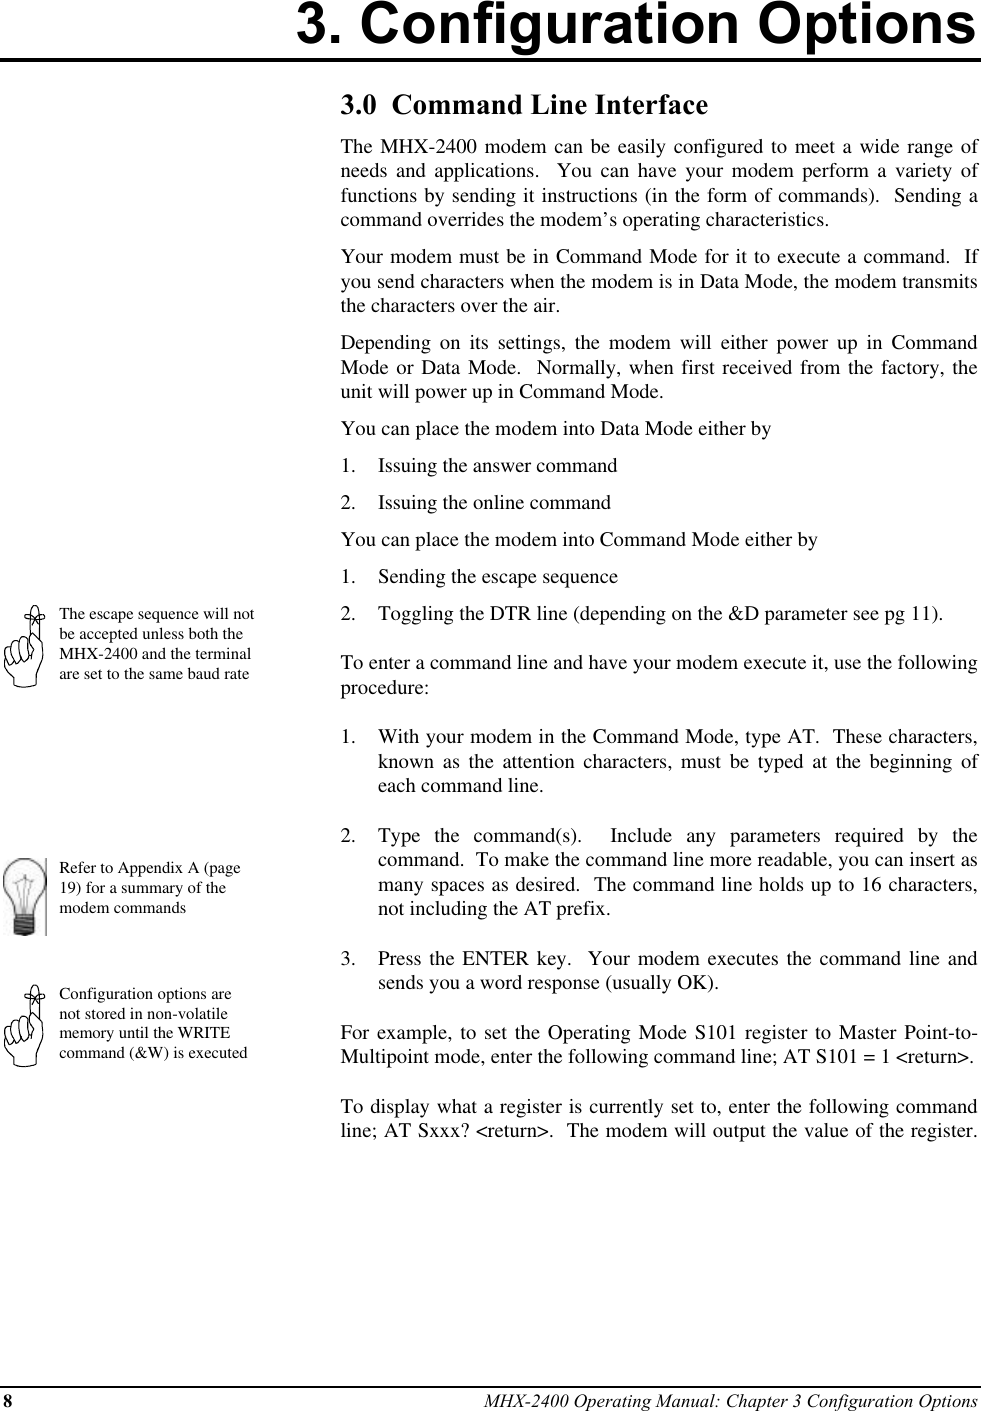 8MHX-2400 Operating Manual: Chapter 3 Configuration Options3. Configuration OptionsThe escape sequence will notbe accepted unless both theMHX-2400 and the terminalare set to the same baud rateRefer to Appendix A (page19) for a summary of themodem commandsConfiguration options arenot stored in non-volatilememory until the WRITEcommand (&amp;W) is executed3.0  Command Line InterfaceThe MHX-2400 modem can be easily configured to meet a wide range ofneeds and applications.  You can have your modem perform a variety offunctions by sending it instructions (in the form of commands).  Sending acommand overrides the modem’s operating characteristics.Your modem must be in Command Mode for it to execute a command.  Ifyou send characters when the modem is in Data Mode, the modem transmitsthe characters over the air.Depending on its settings, the modem will either power up in CommandMode or Data Mode.  Normally, when first received from the factory, theunit will power up in Command Mode.You can place the modem into Data Mode either by1.  Issuing the answer command2.  Issuing the online commandYou can place the modem into Command Mode either by1.  Sending the escape sequence2.  Toggling the DTR line (depending on the &amp;D parameter see pg 11).To enter a command line and have your modem execute it, use the followingprocedure:1.  With your modem in the Command Mode, type AT.  These characters,known as the attention characters, must be typed at the beginning ofeach command line.2.  Type the command(s).  Include any parameters required by thecommand.  To make the command line more readable, you can insert asmany spaces as desired.  The command line holds up to 16 characters,not including the AT prefix.3.  Press the ENTER key.  Your modem executes the command line andsends you a word response (usually OK).For example, to set the Operating Mode S101 register to Master Point-to-Multipoint mode, enter the following command line; AT S101 = 1 &lt;return&gt;.To display what a register is currently set to, enter the following commandline; AT Sxxx? &lt;return&gt;.  The modem will output the value of the register.